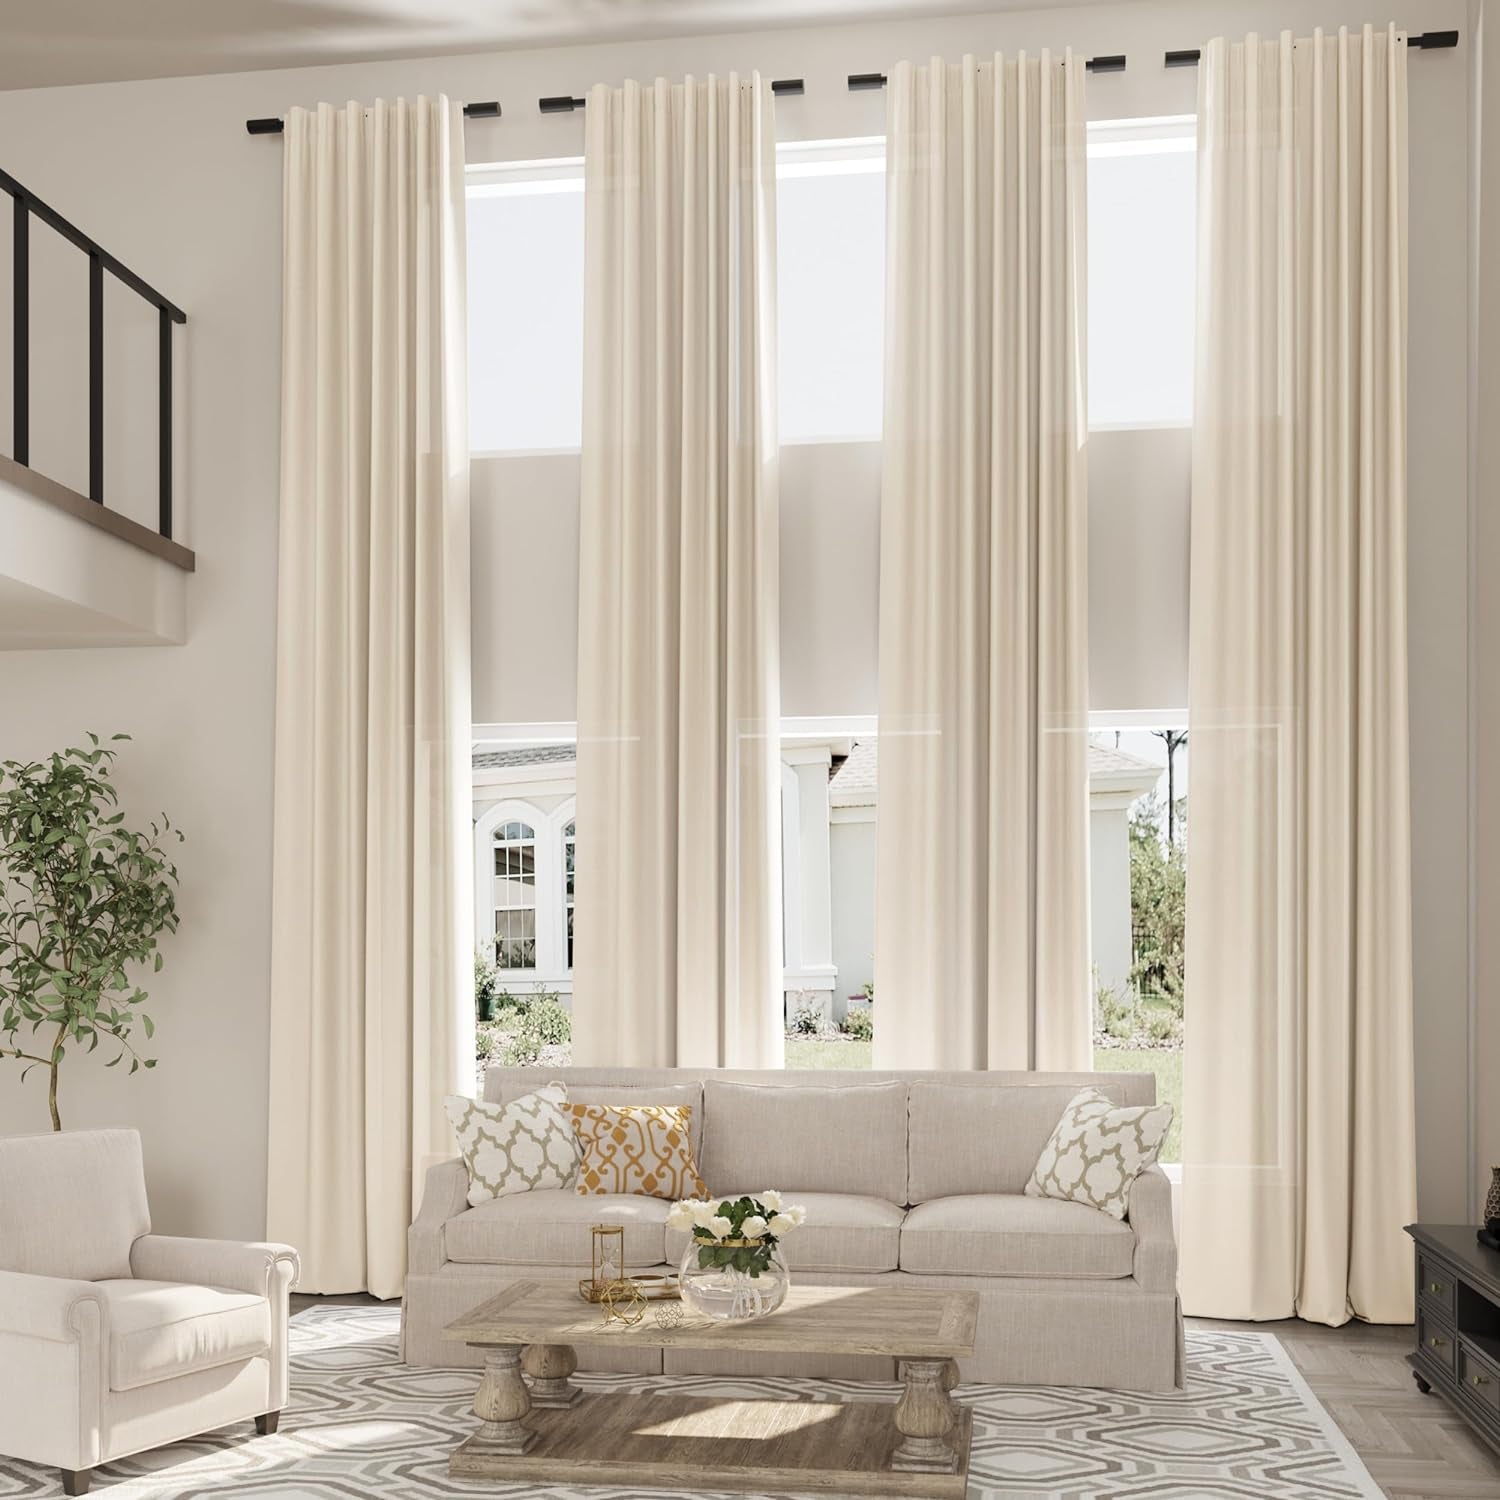 132 Inch Linen Curtains for High Ceiling Living Room Back Tab Hooks Pinch Pleat Custom Made Drape Semi Sheer Extra Long Curtain 132 Inches Long for 2 Story Windows Sliding Door Cream Ivory Birch  Aersas   